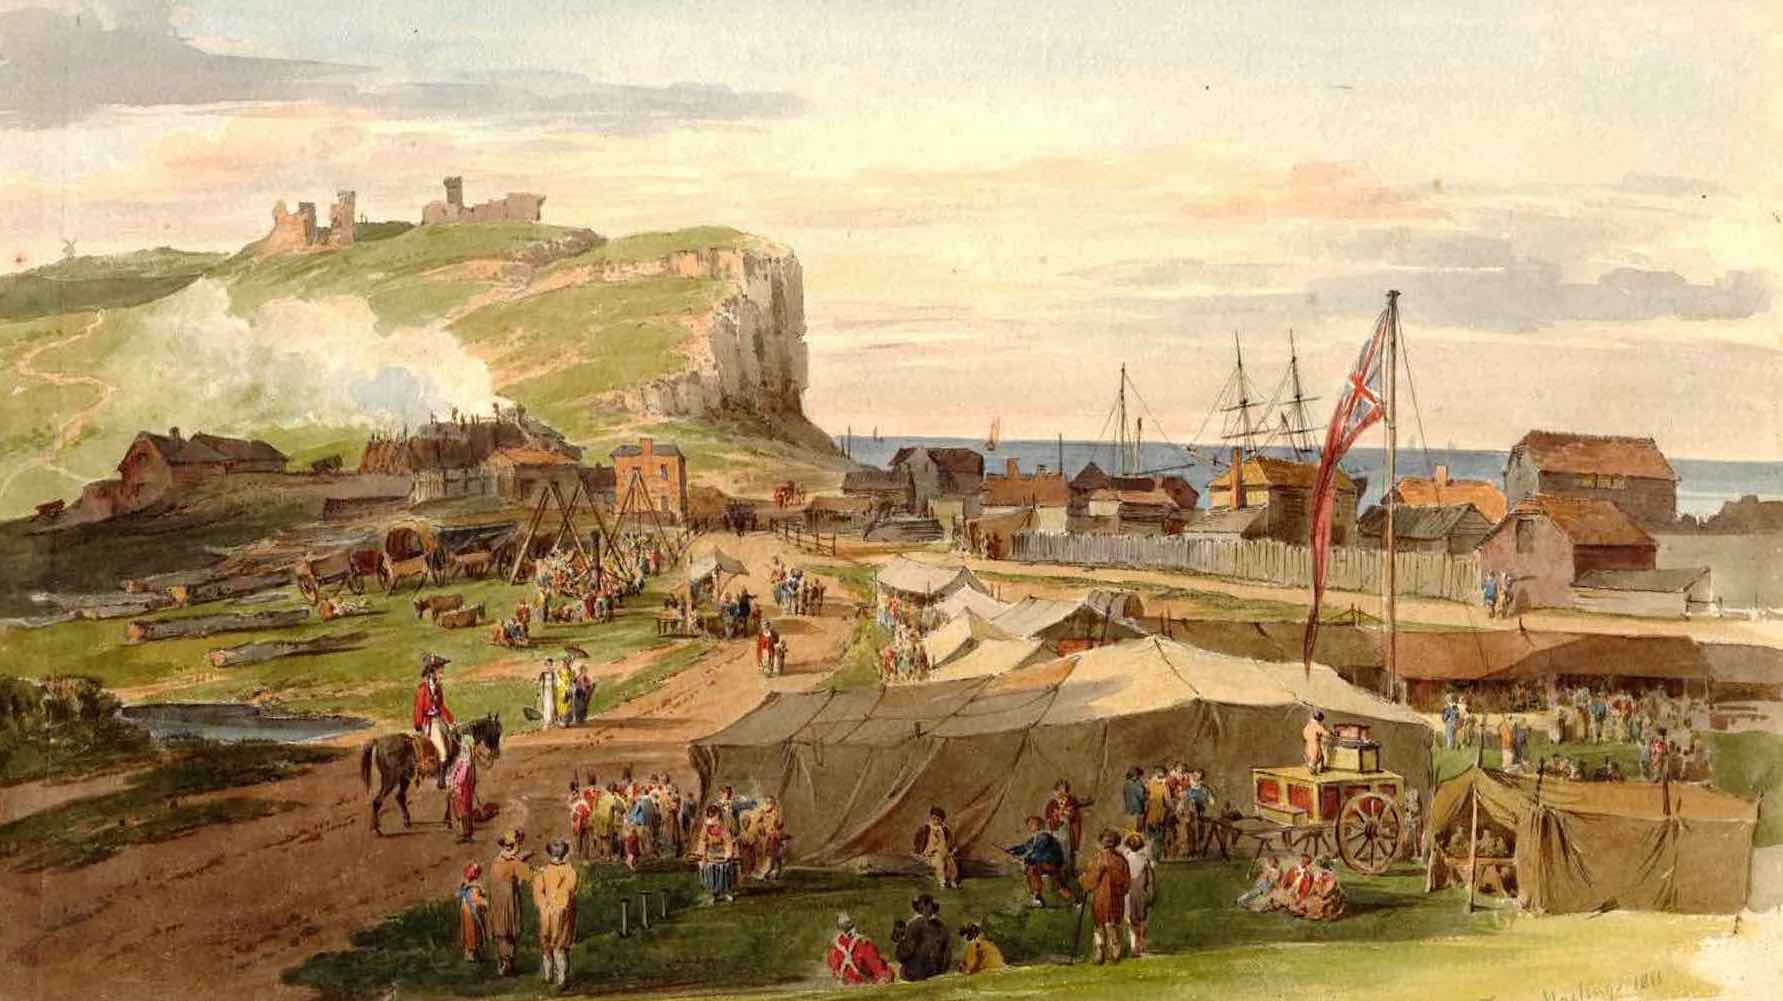 Painting of the Rock Fair, 1811 July by Paul Sandby Munn for Rock On, Rock Fair project by MSL Projects